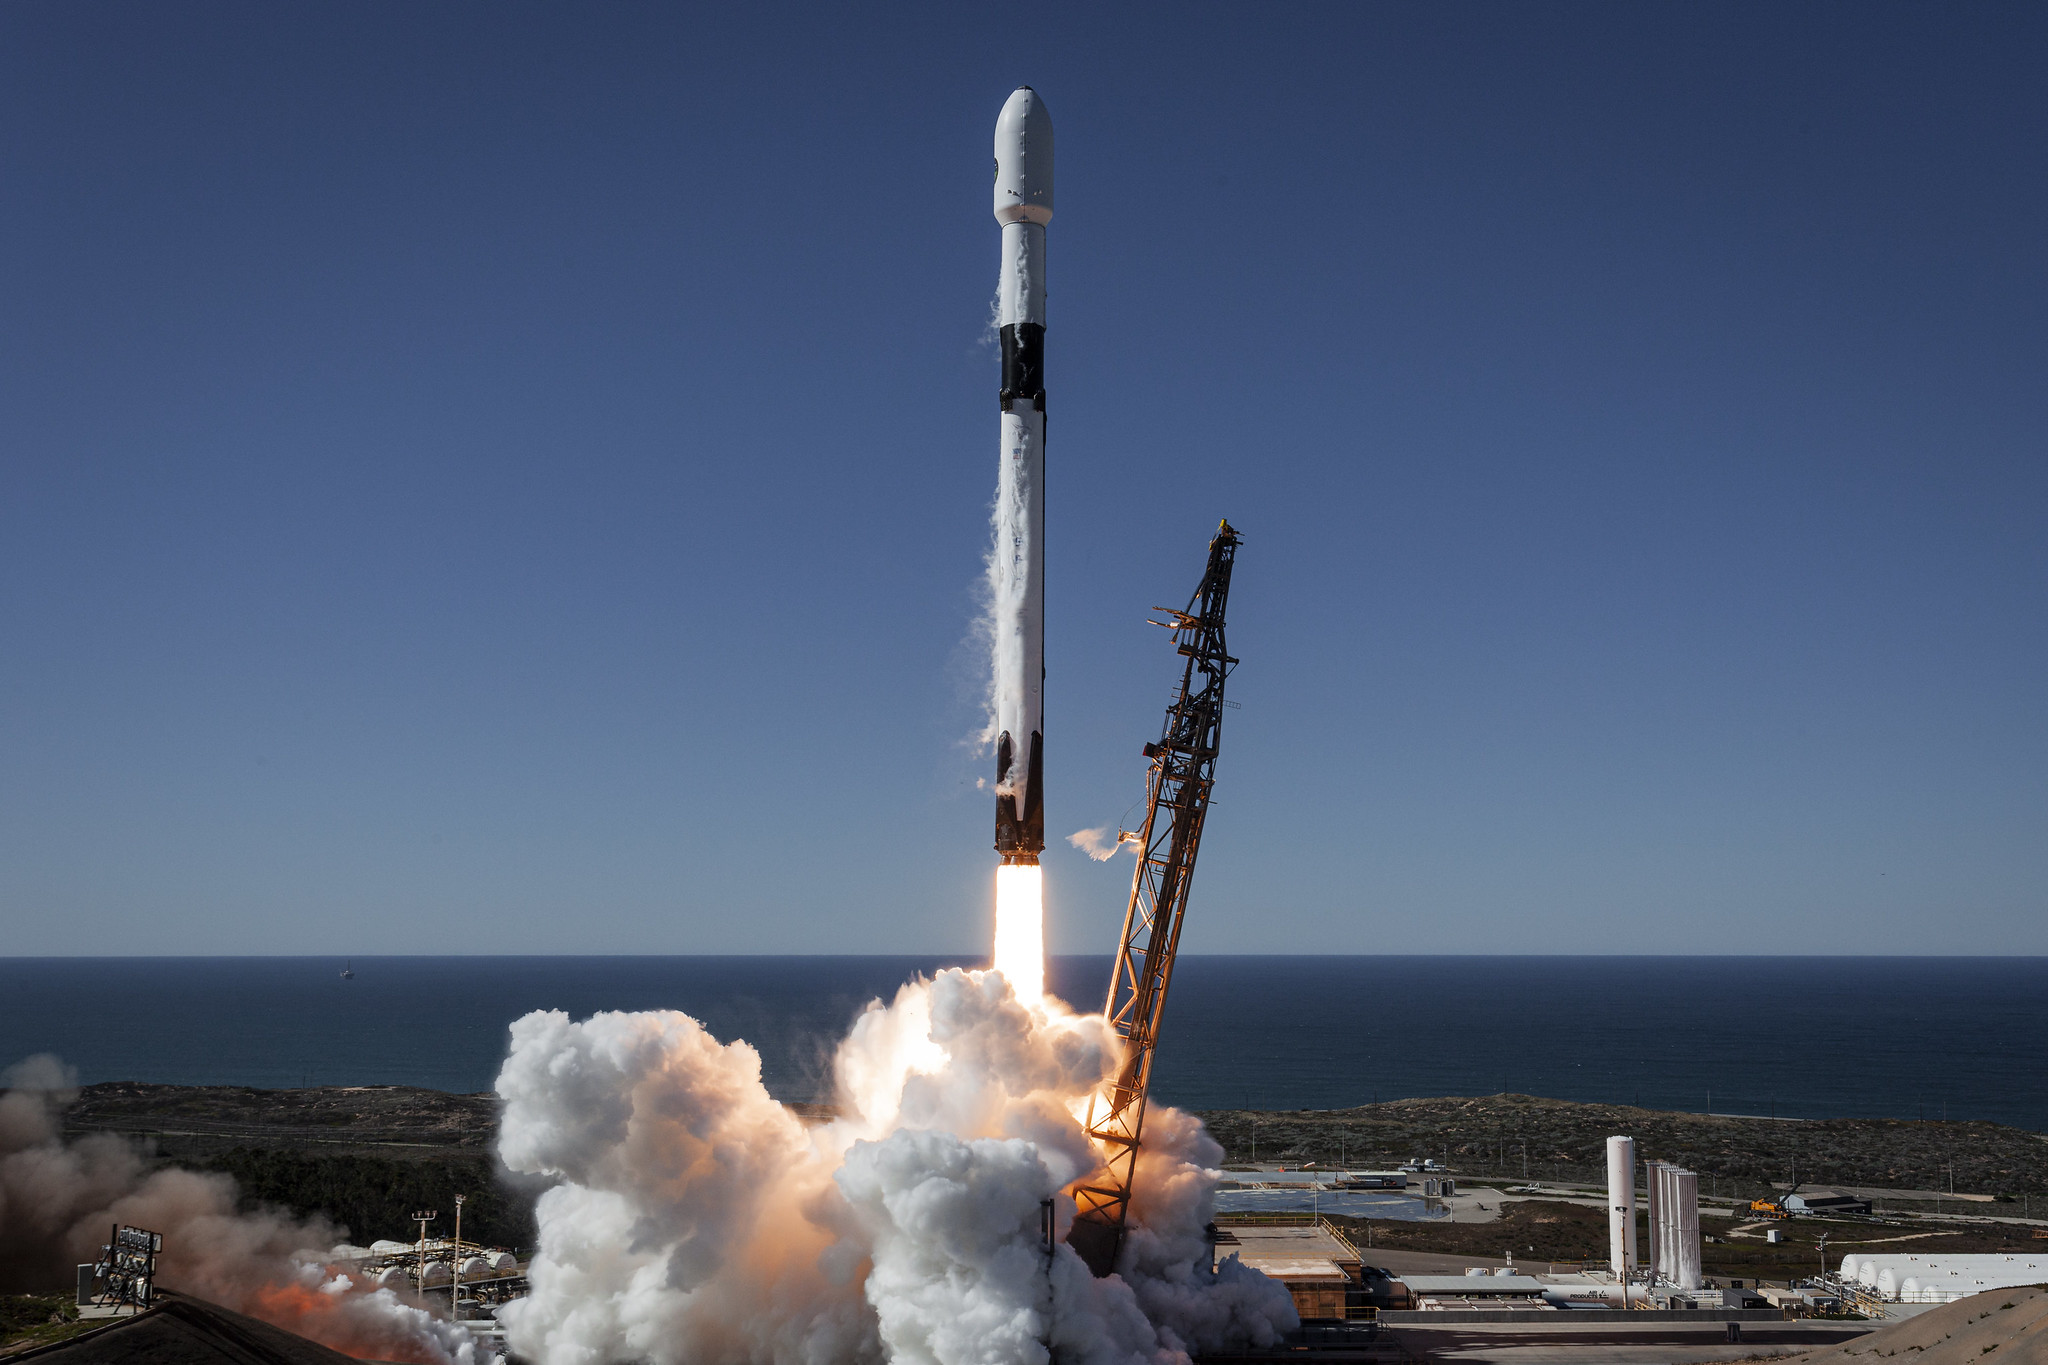 A new SpaceX Falcon 9 rocket launches the classified NROL-87 spy satellite for the U.S. National Reconnaissance Office on Feb. 3, 2022 from Space Launch Complex 4E at Vandenberg Space Force Base in California.